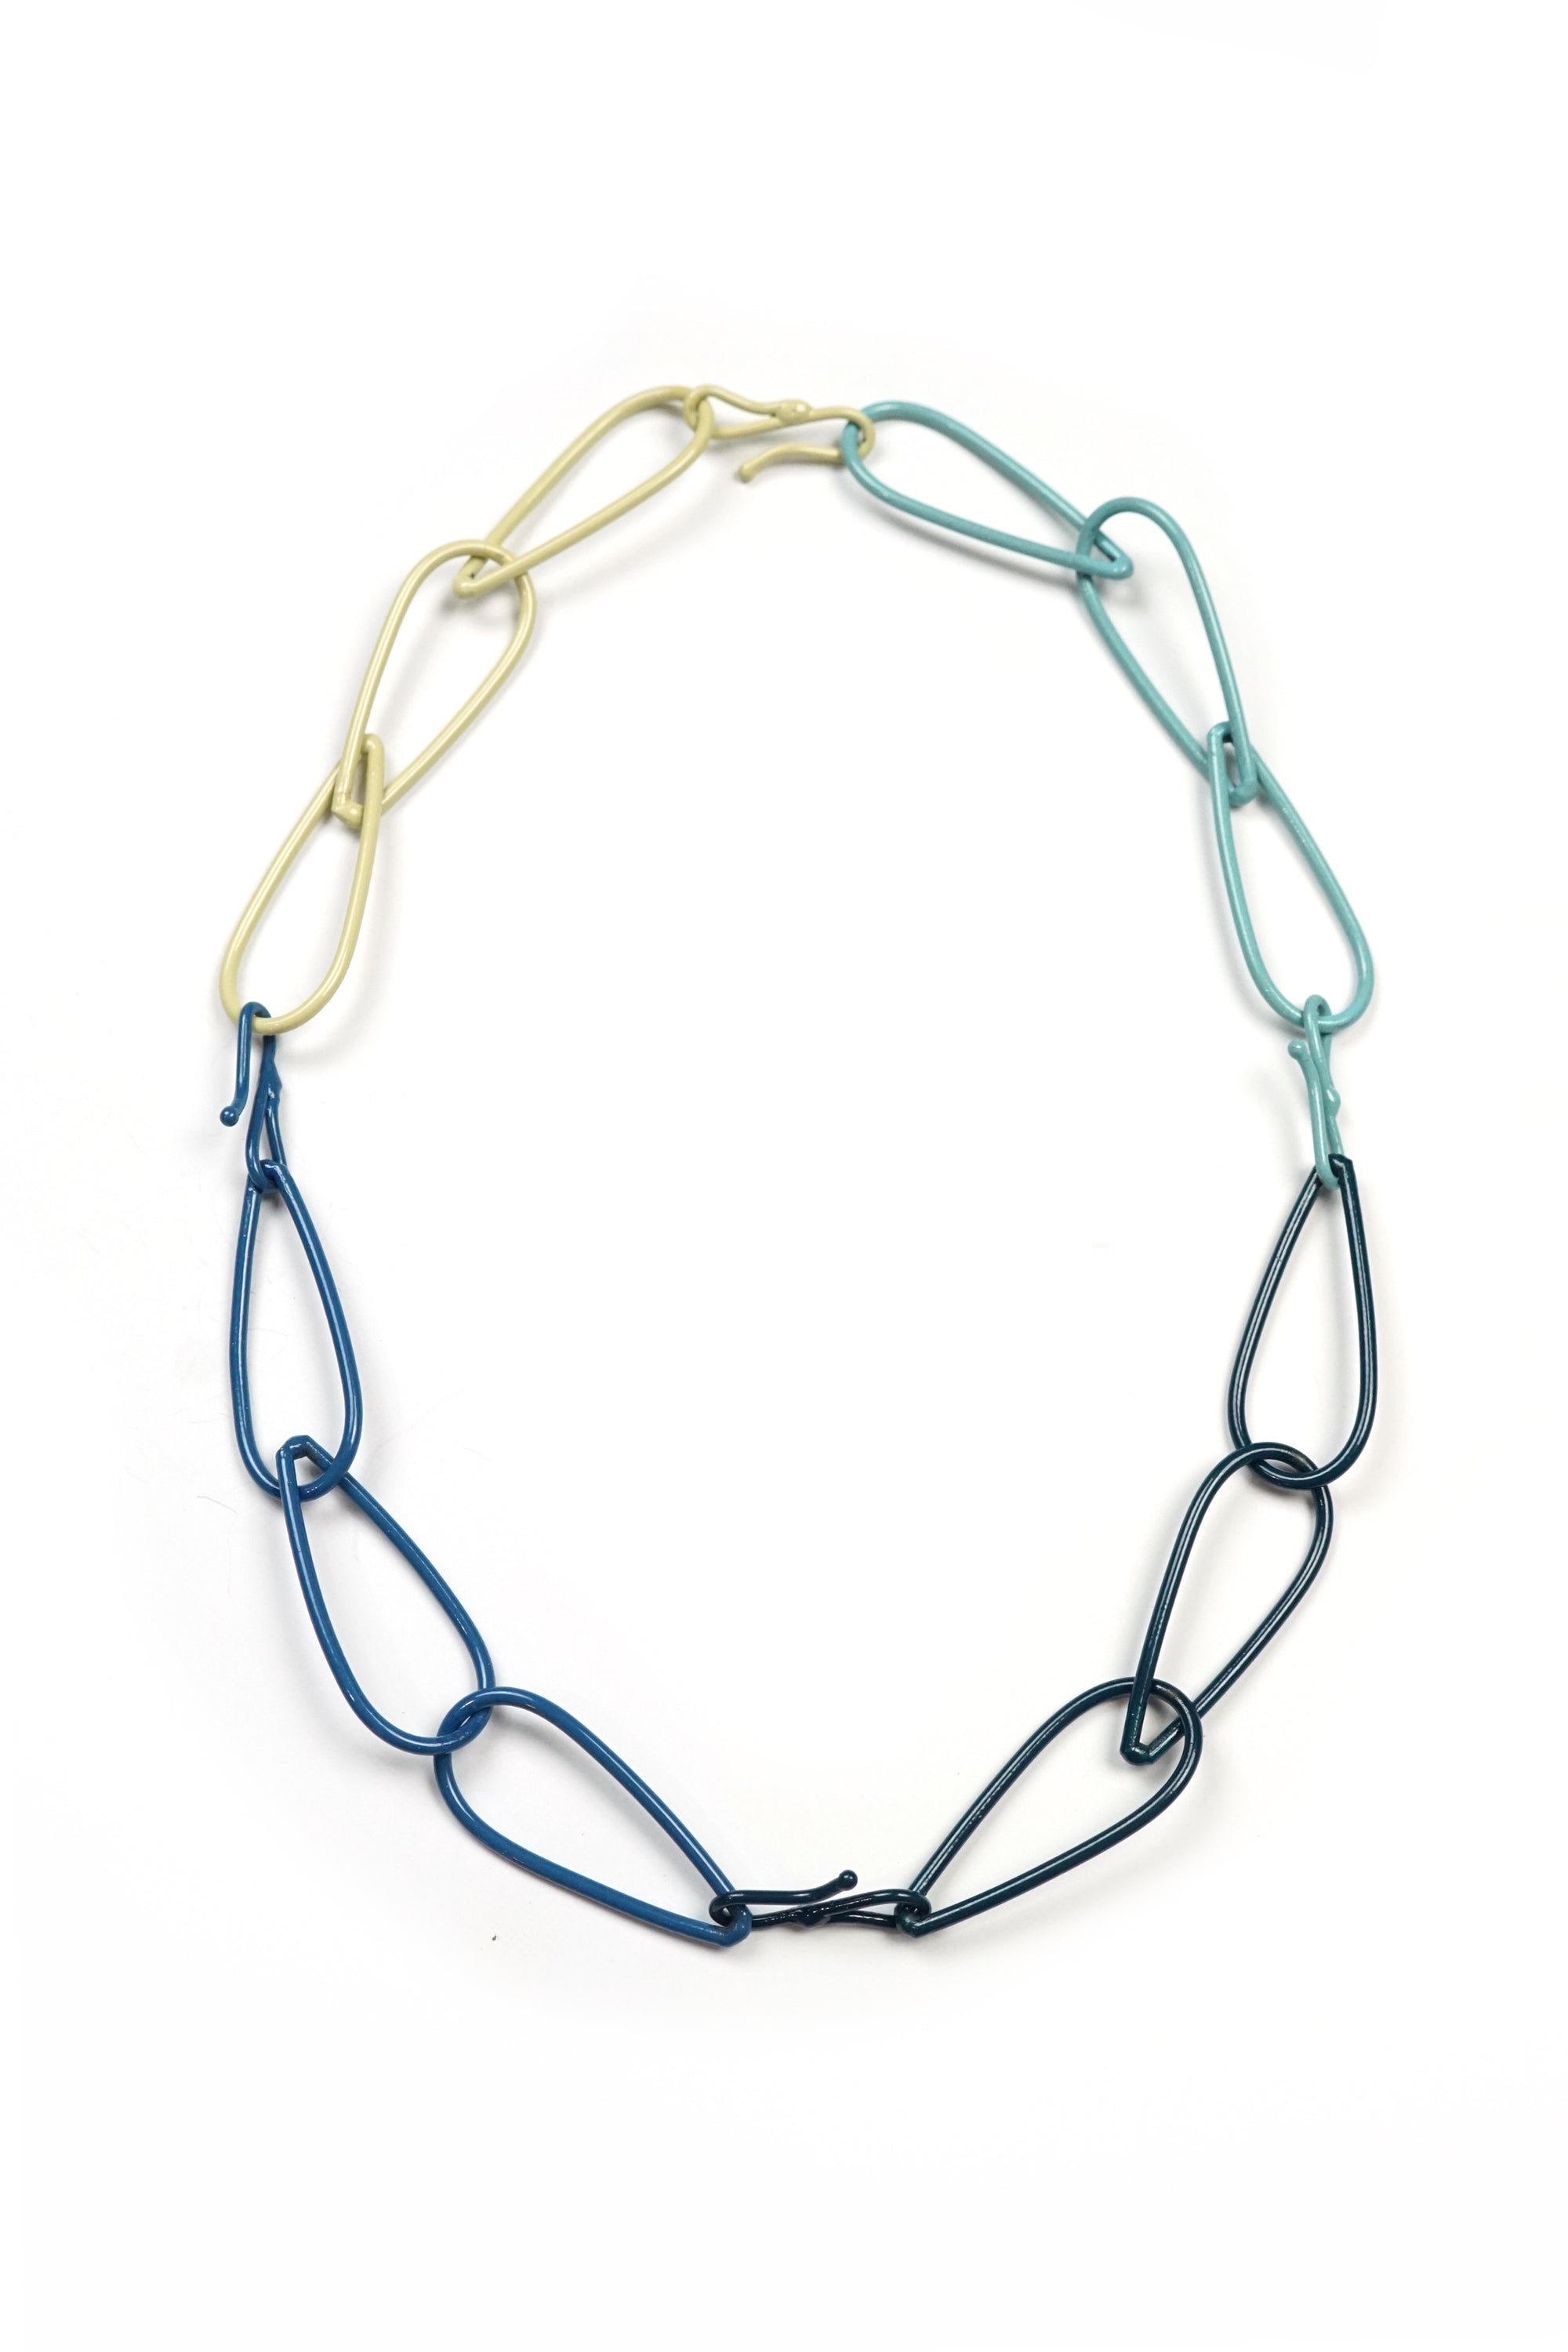 Modular Necklace in Deep Ocean, Azure Blue, Faded Teal, and Green Sand